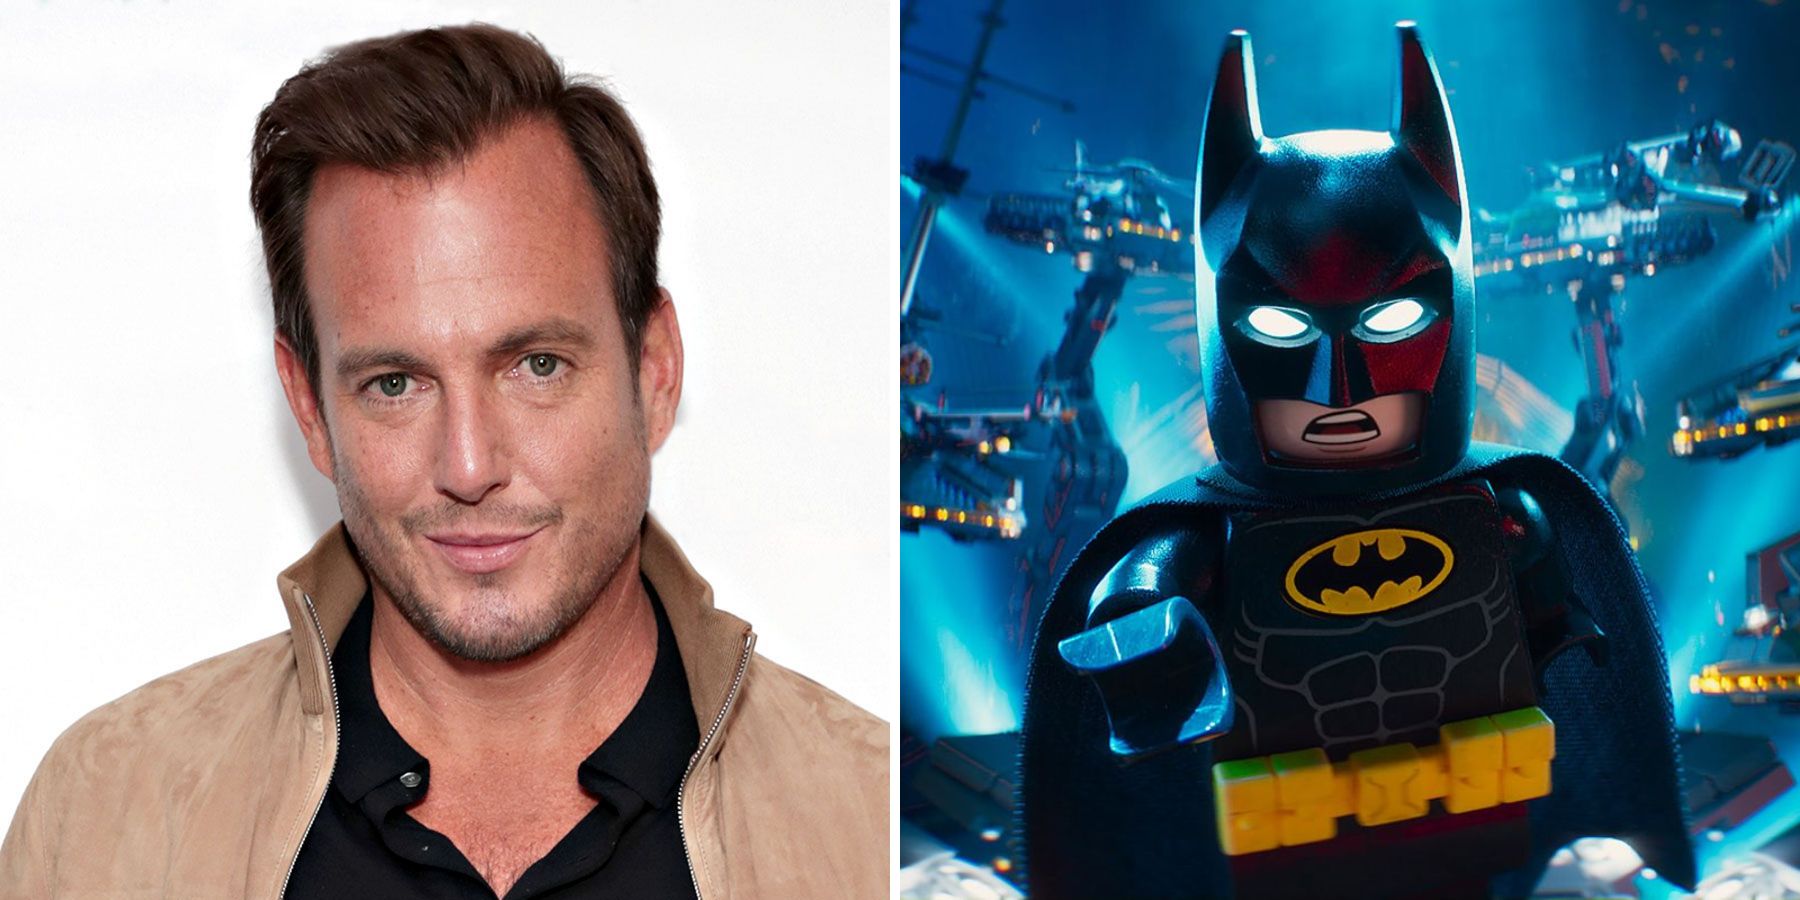 A split image of Will Arnett and the Lego Batman he voices in The Lego Batman Movie